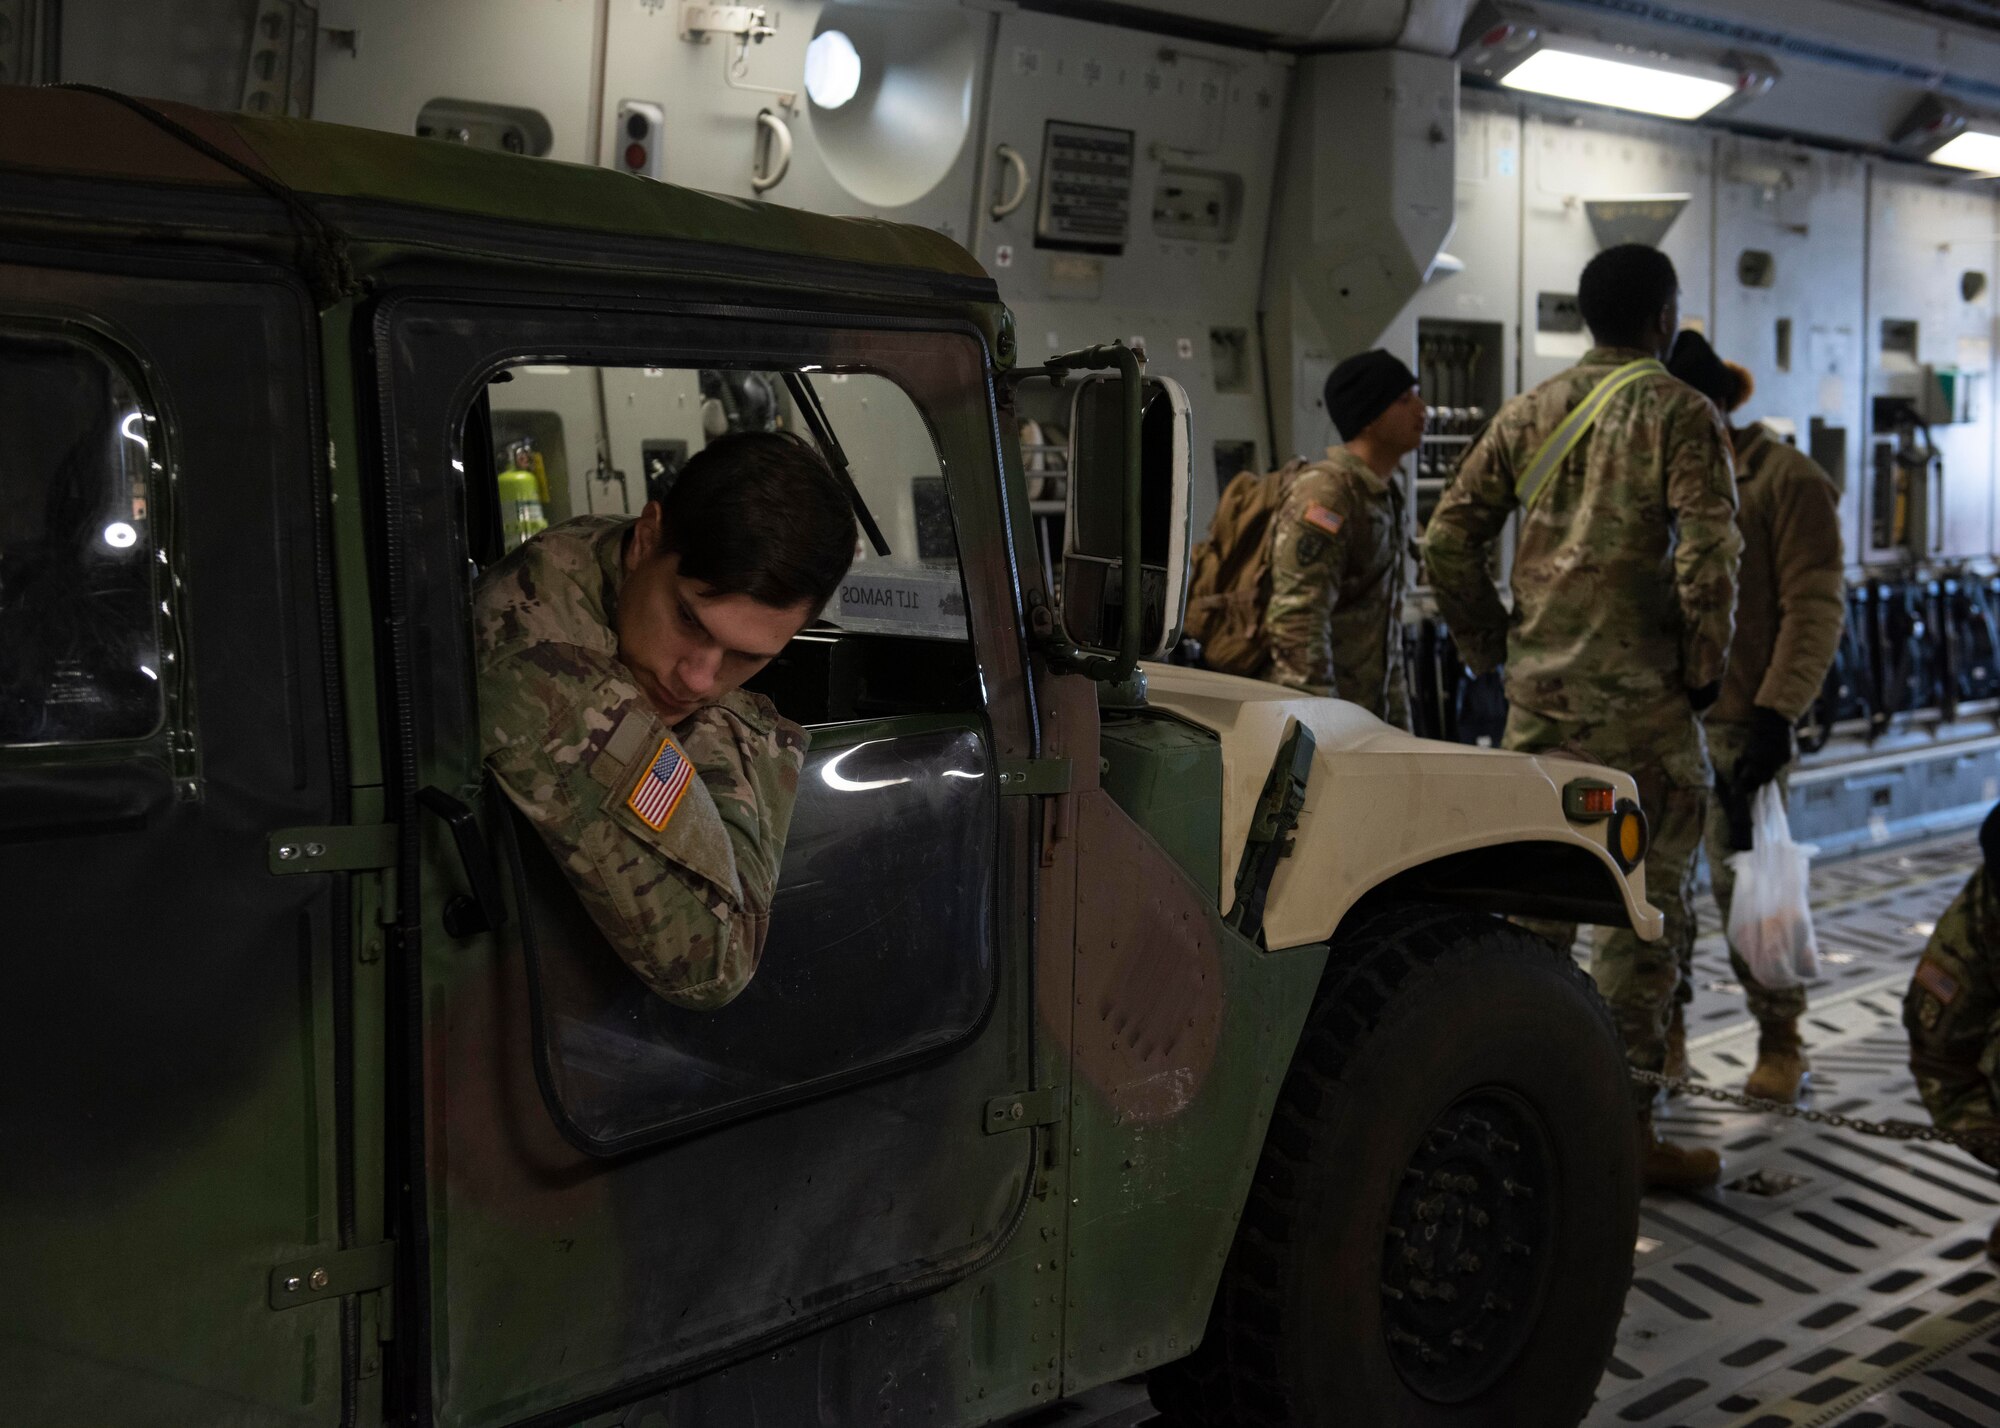 The joint training assessed the units’ abilities and knowledge in mission essential tasks and static cold loading for personnel and equipment.